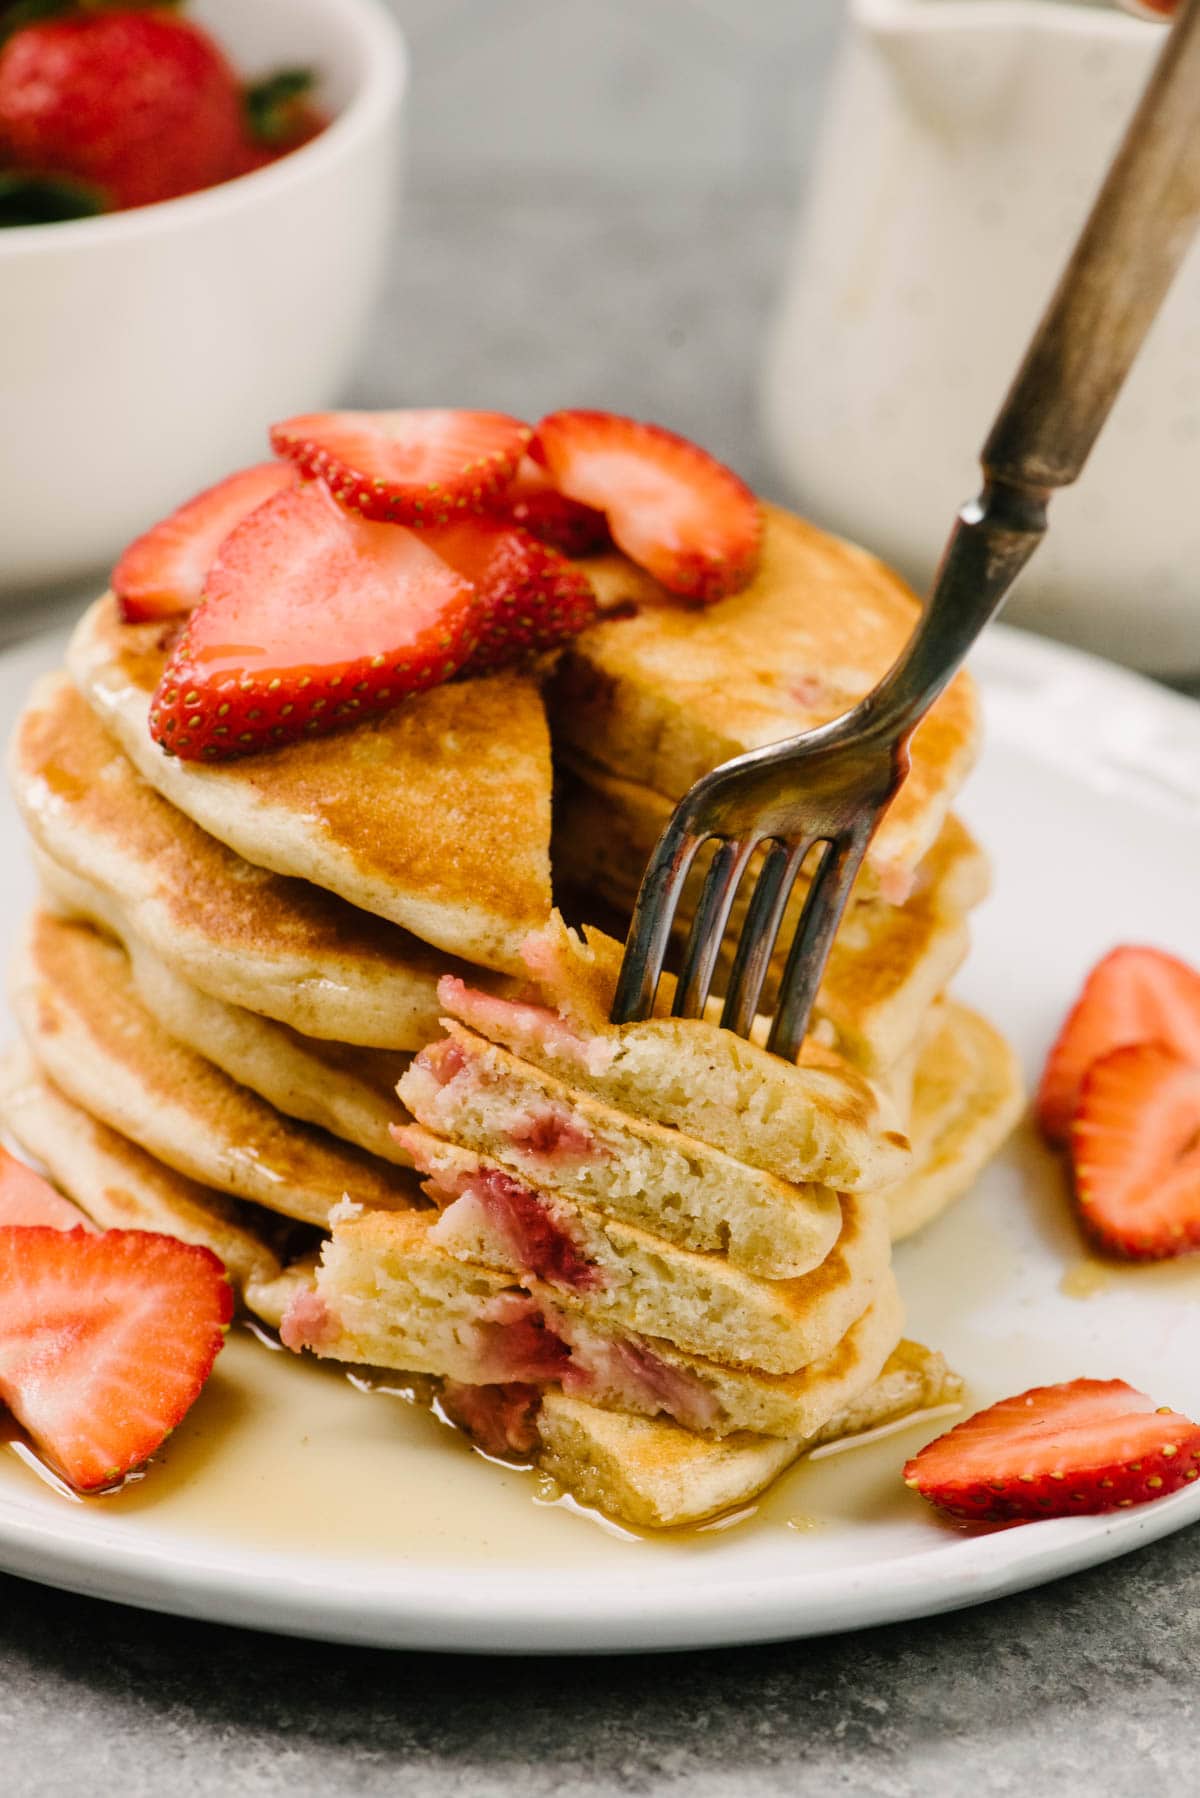 Side view, a fork removing a bite from a stack of strawberry pancakes on a white plate, with a pitch of maple syrup and bowl of fresh whole strawberries in the background.